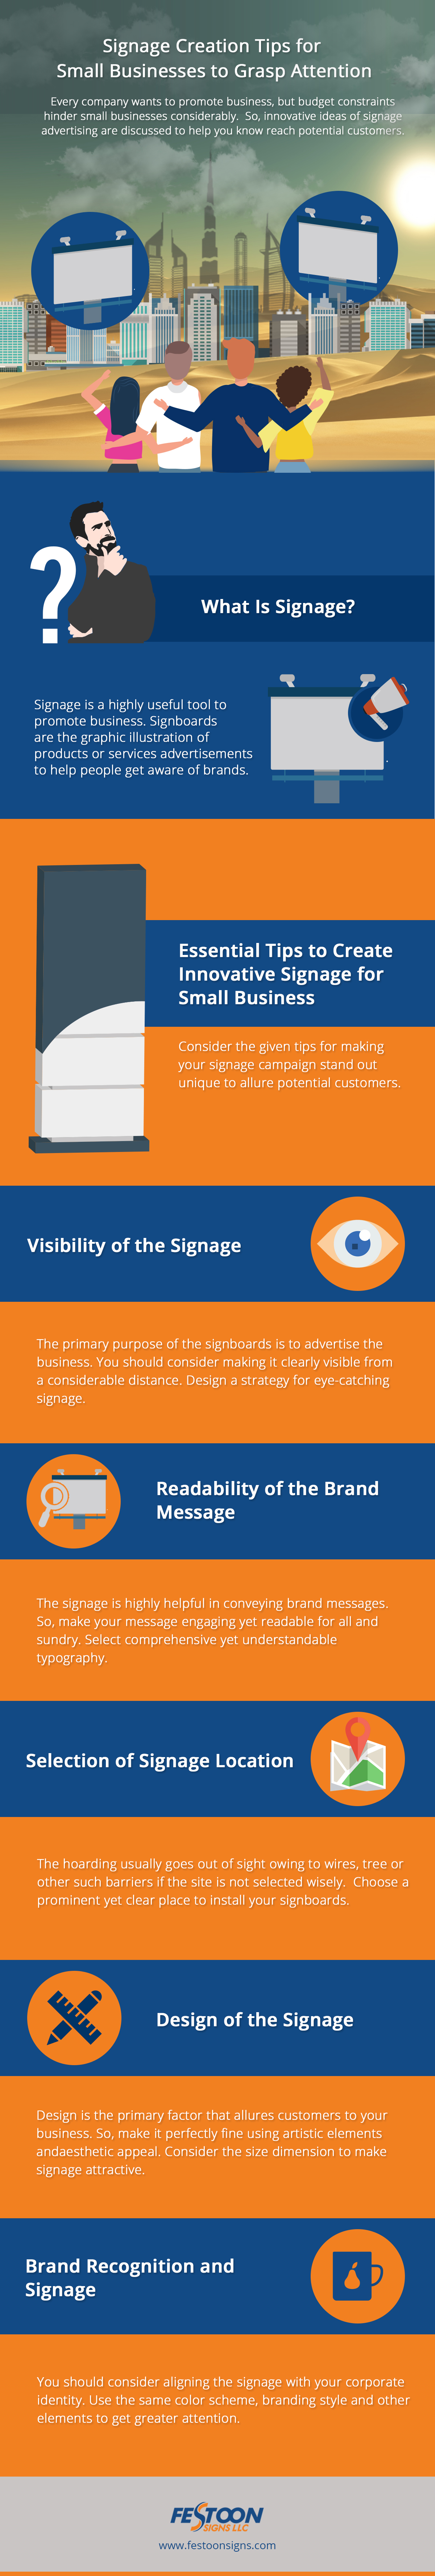 Signage Creation Tips for Small Businesses to Grasp Attention